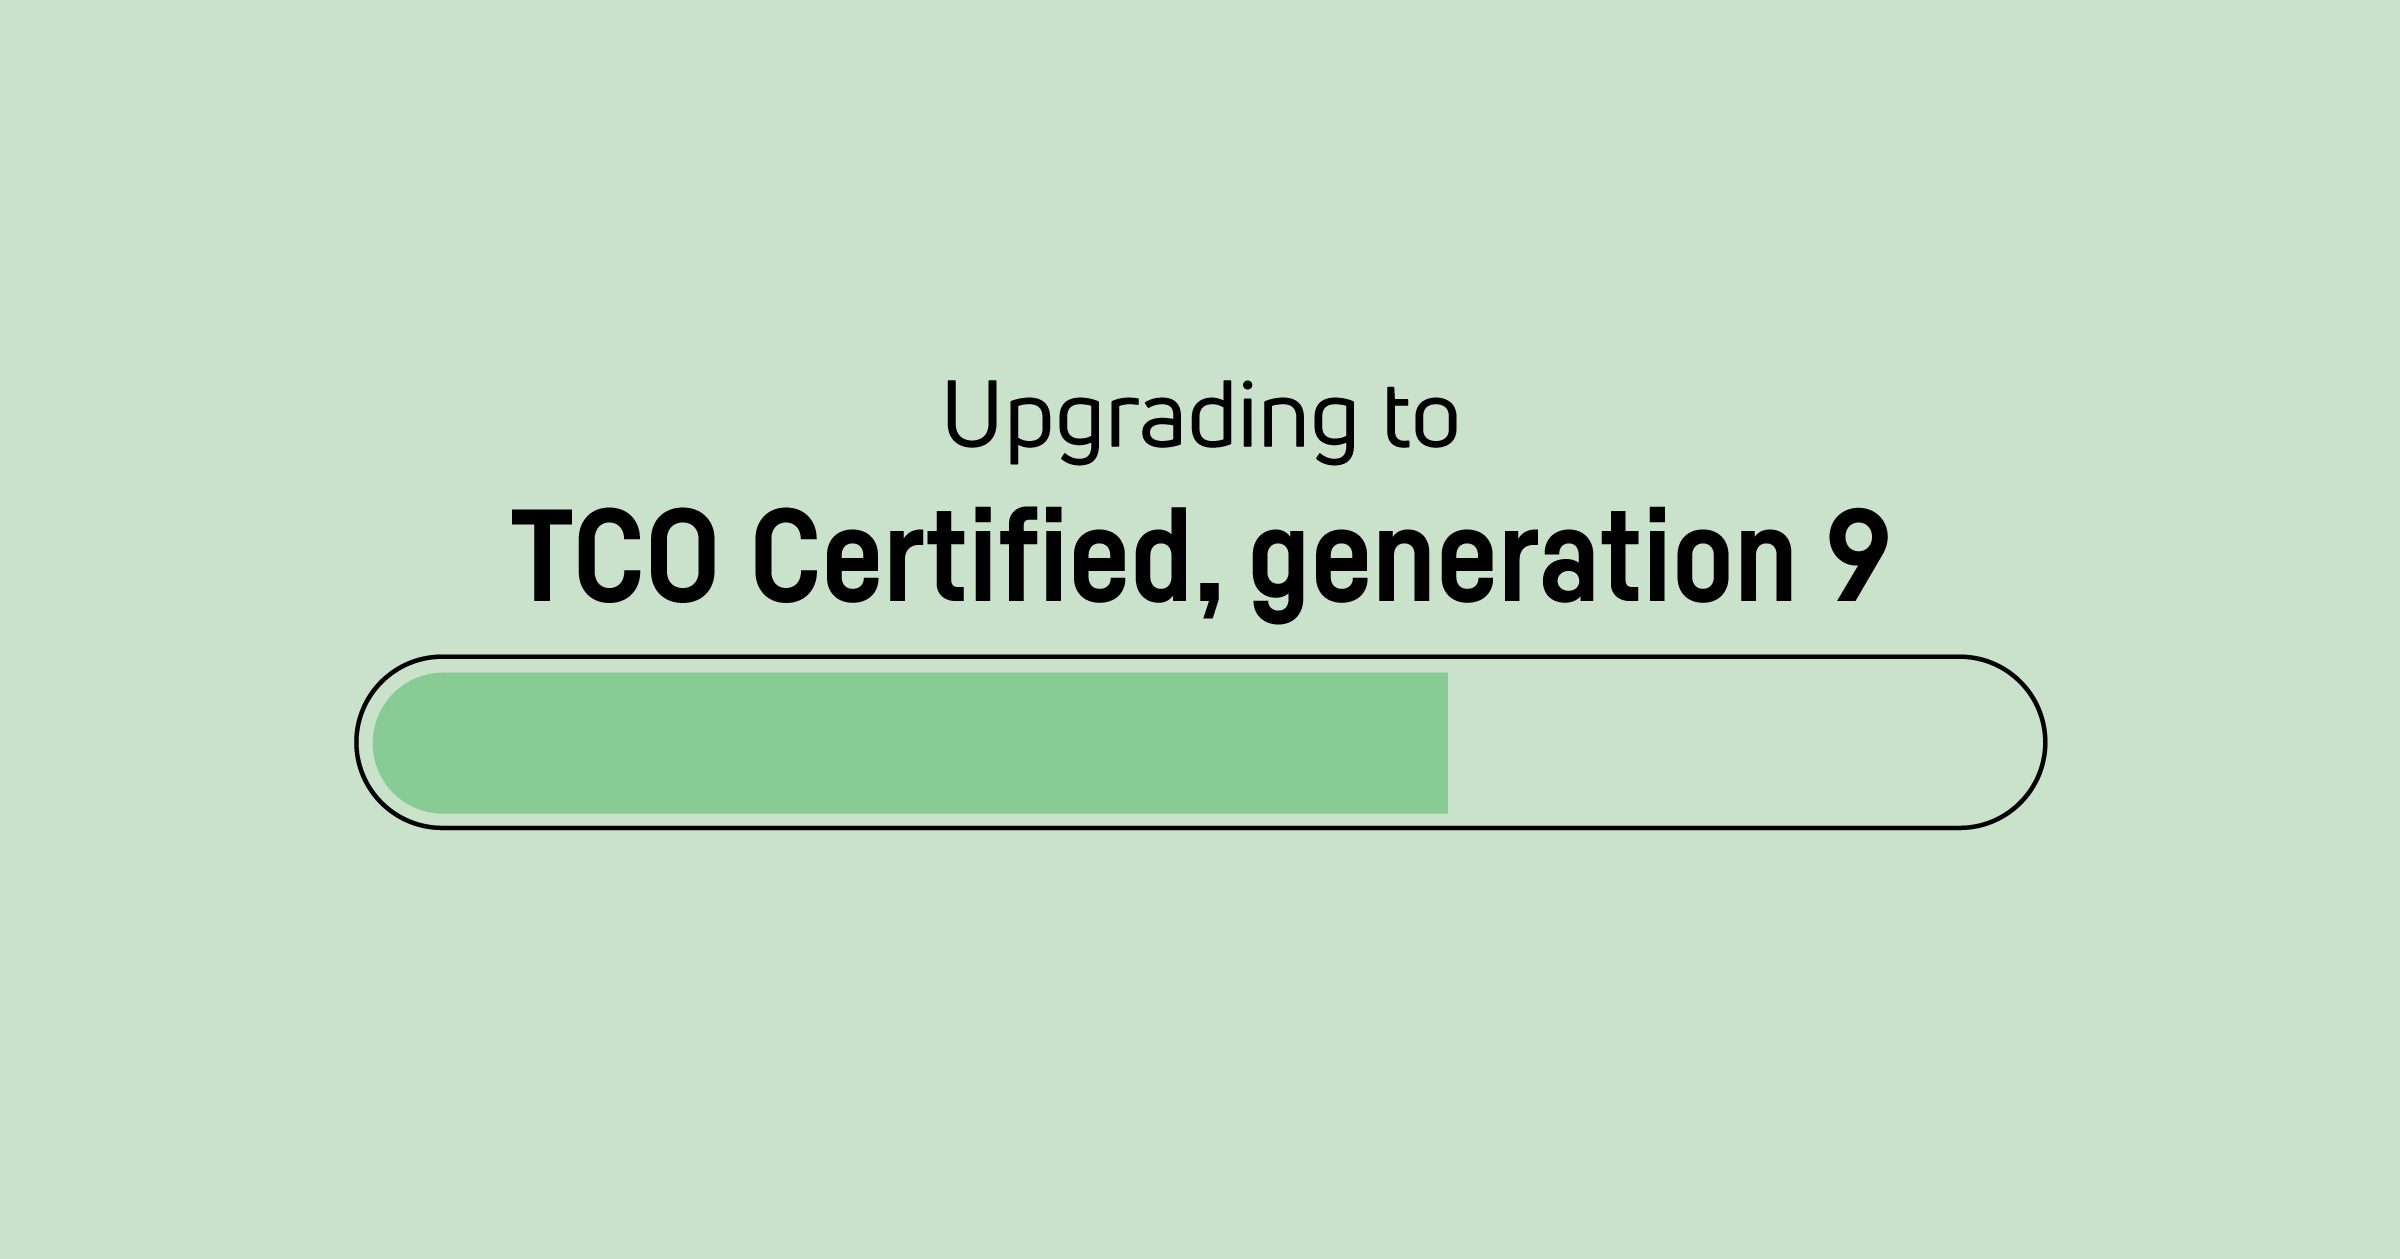 Time to upgrade TCO Certified, generation 8 certificates